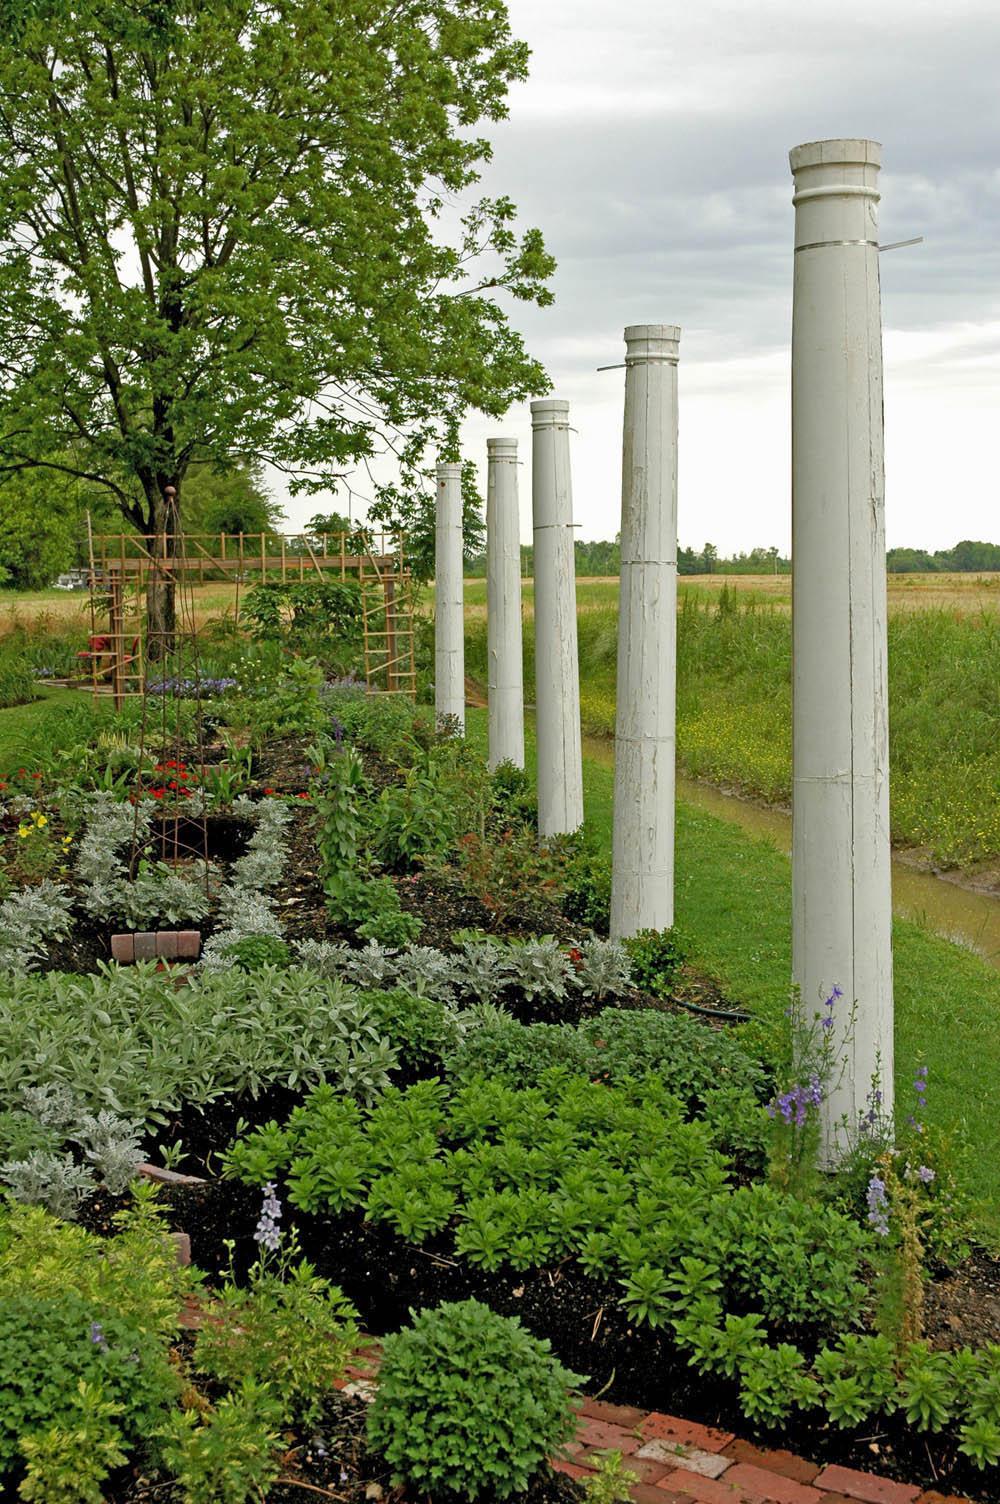 Columns from a former home provide a ghostly Southern archaeological feel to the edge of this Delta garden.